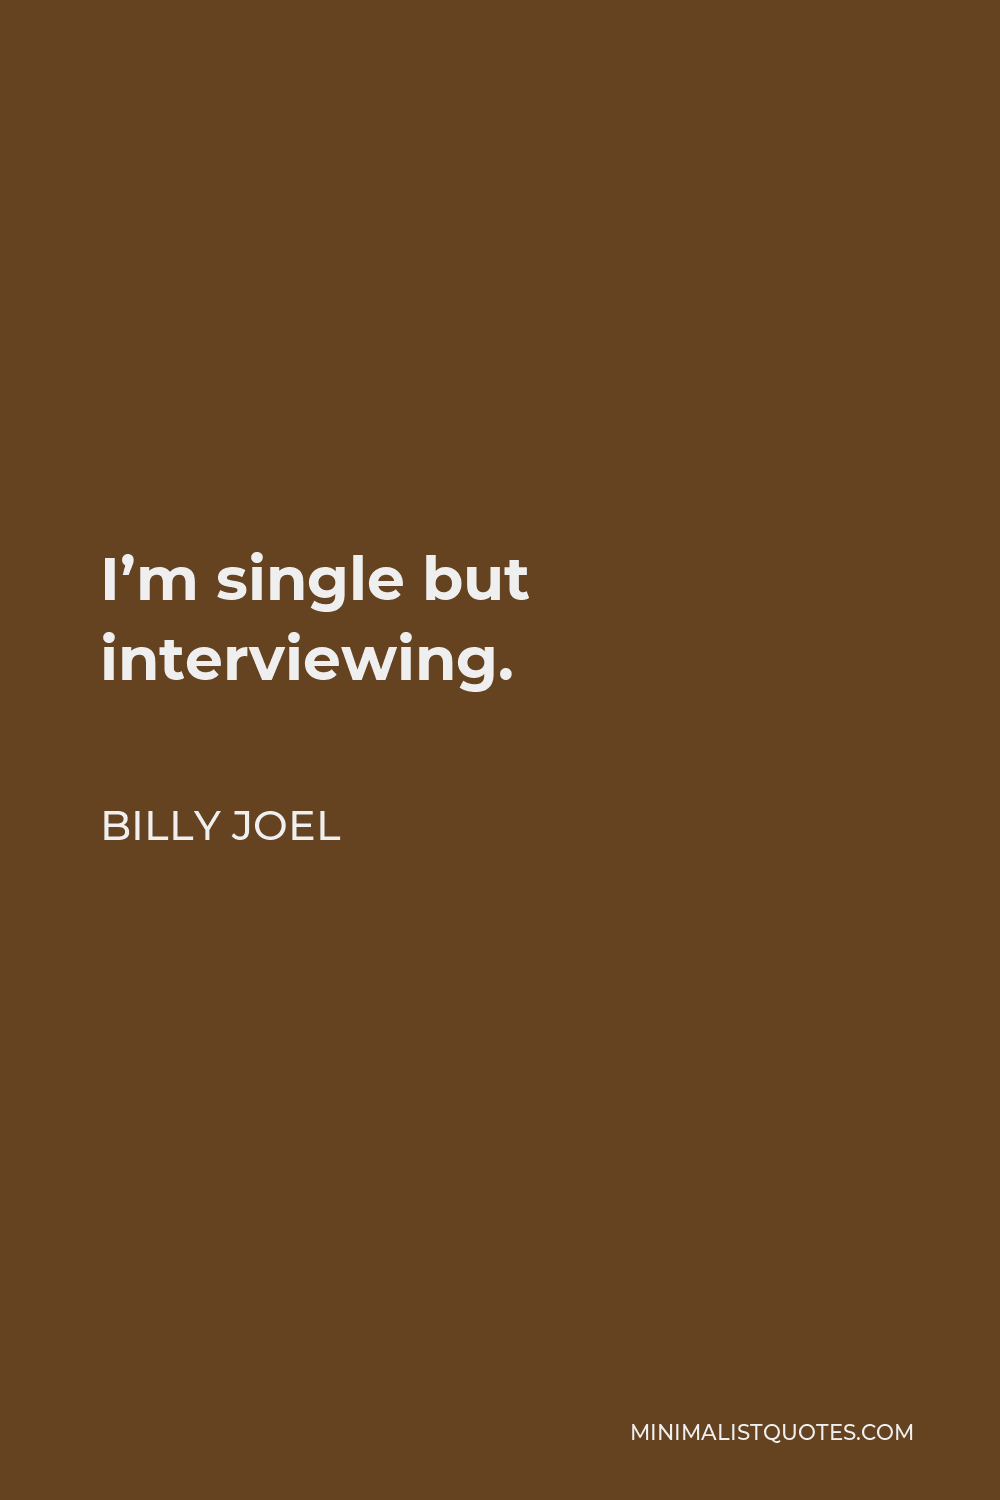 Billy Joel Quote - I’m single but interviewing.